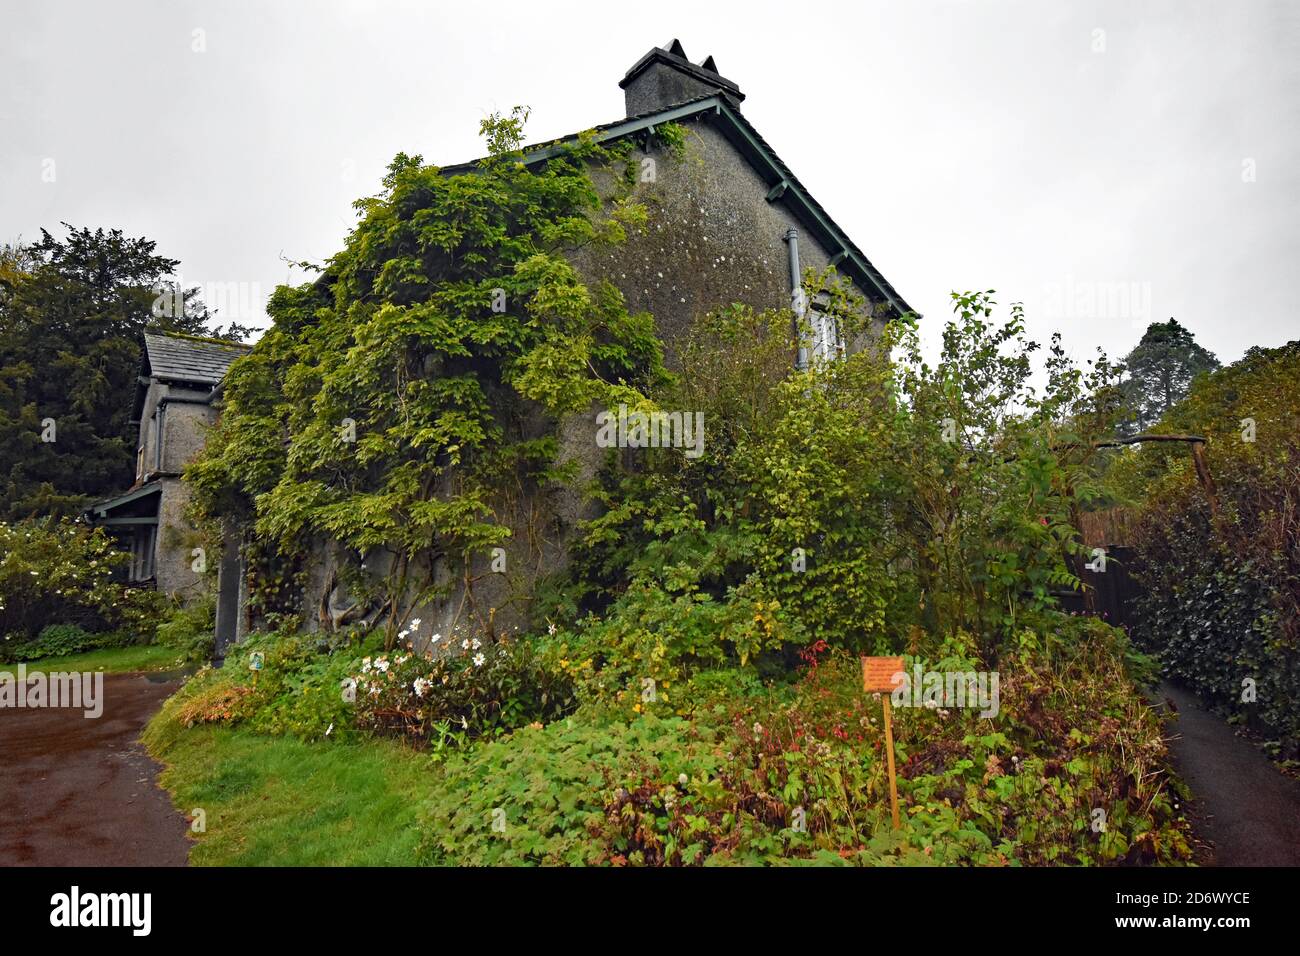 Hill Top, the home of children's author, Beatrix Potter, in the Lake District, Cumbria, England. Plants climb the side of the grey coloured cottage. Stock Photo